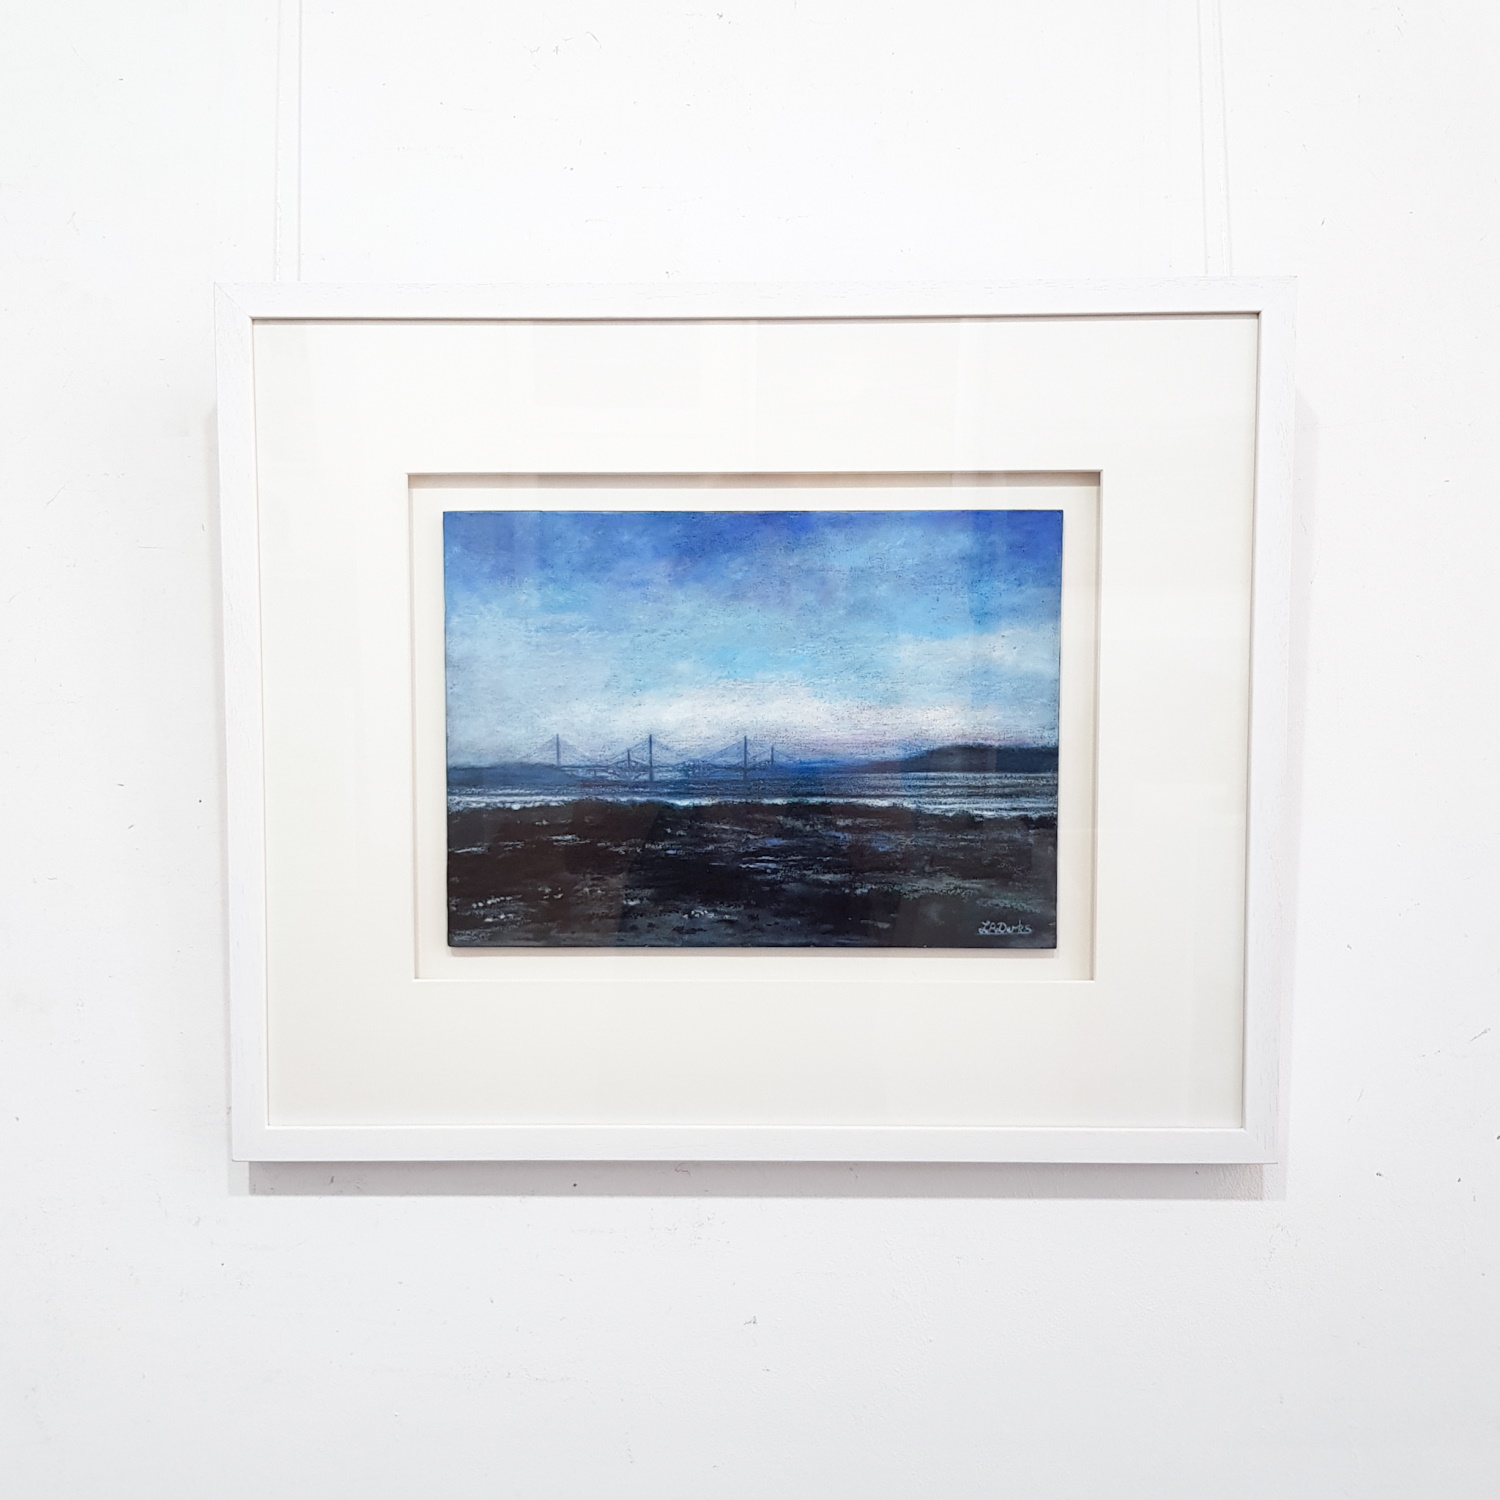 'View from Blackness Study' by artist Lesley Anne Derks